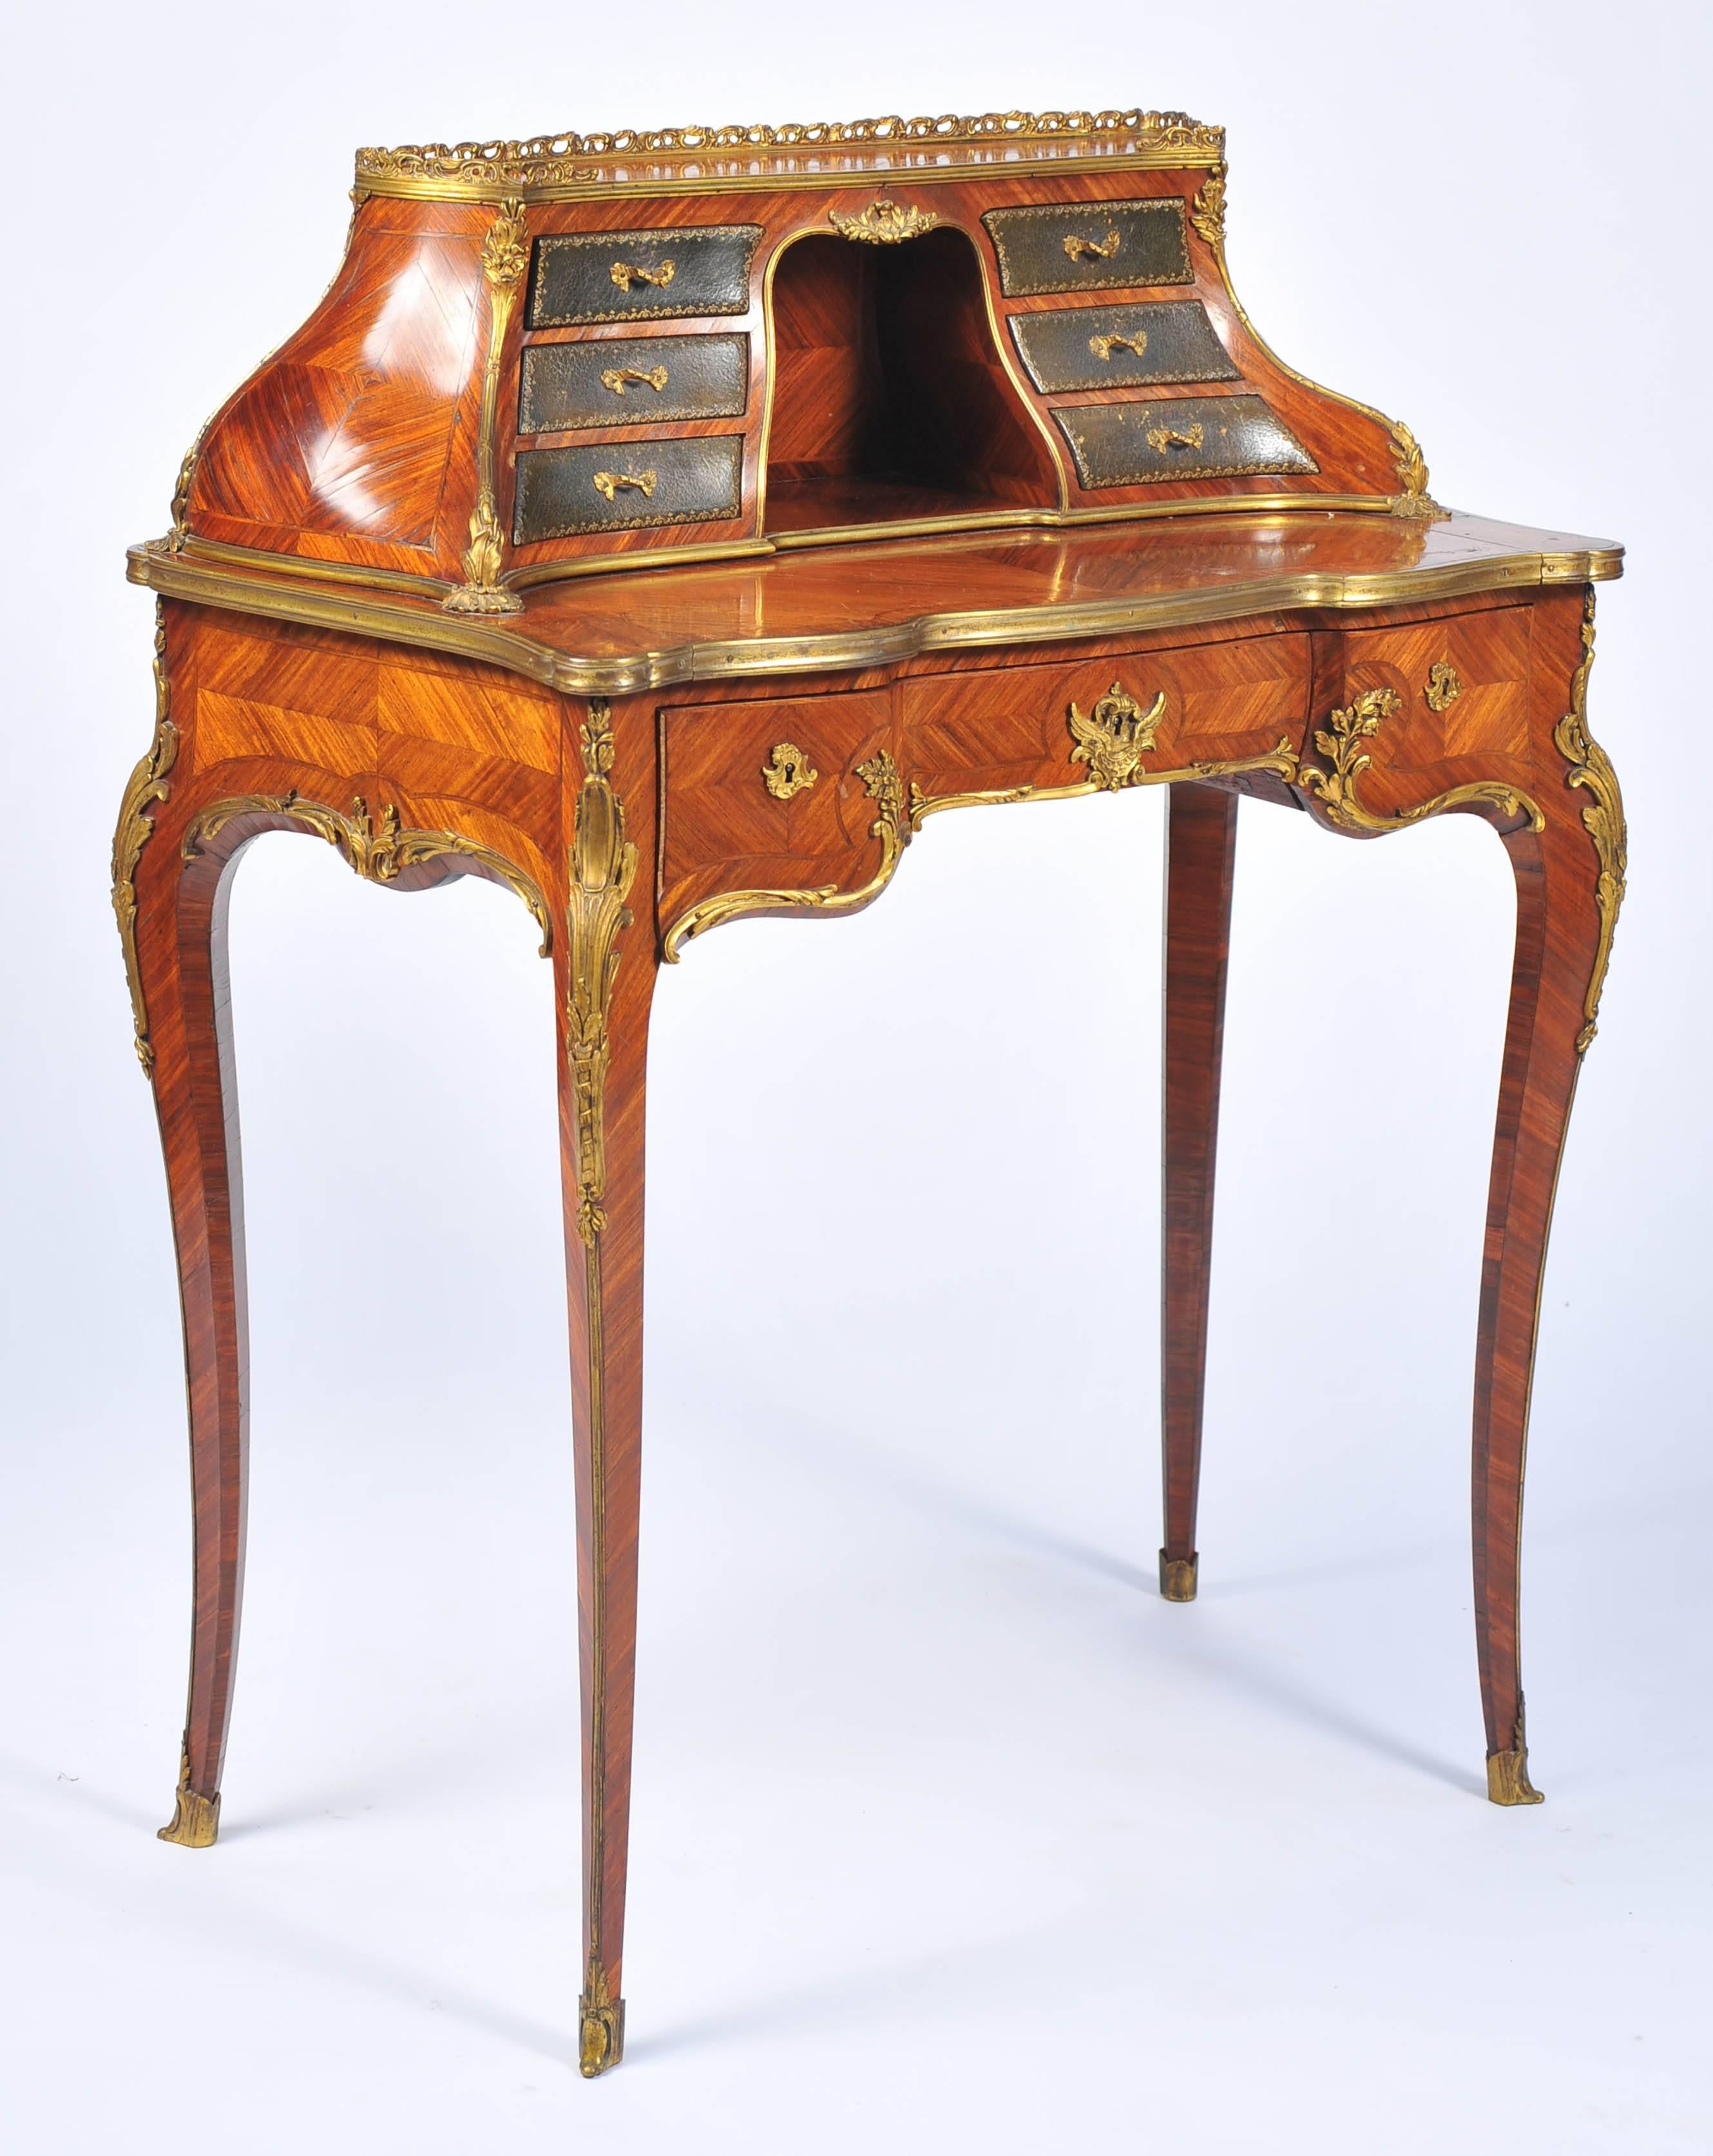 A very good quality Louis XV style French kingwood, ormolu-mounted bureau de-dame. Having six leather fronted drawers to the top, bombe sided. Three frieze drawers, raised on elegant cabriole legs, terminating in scrolled ormolu feet.